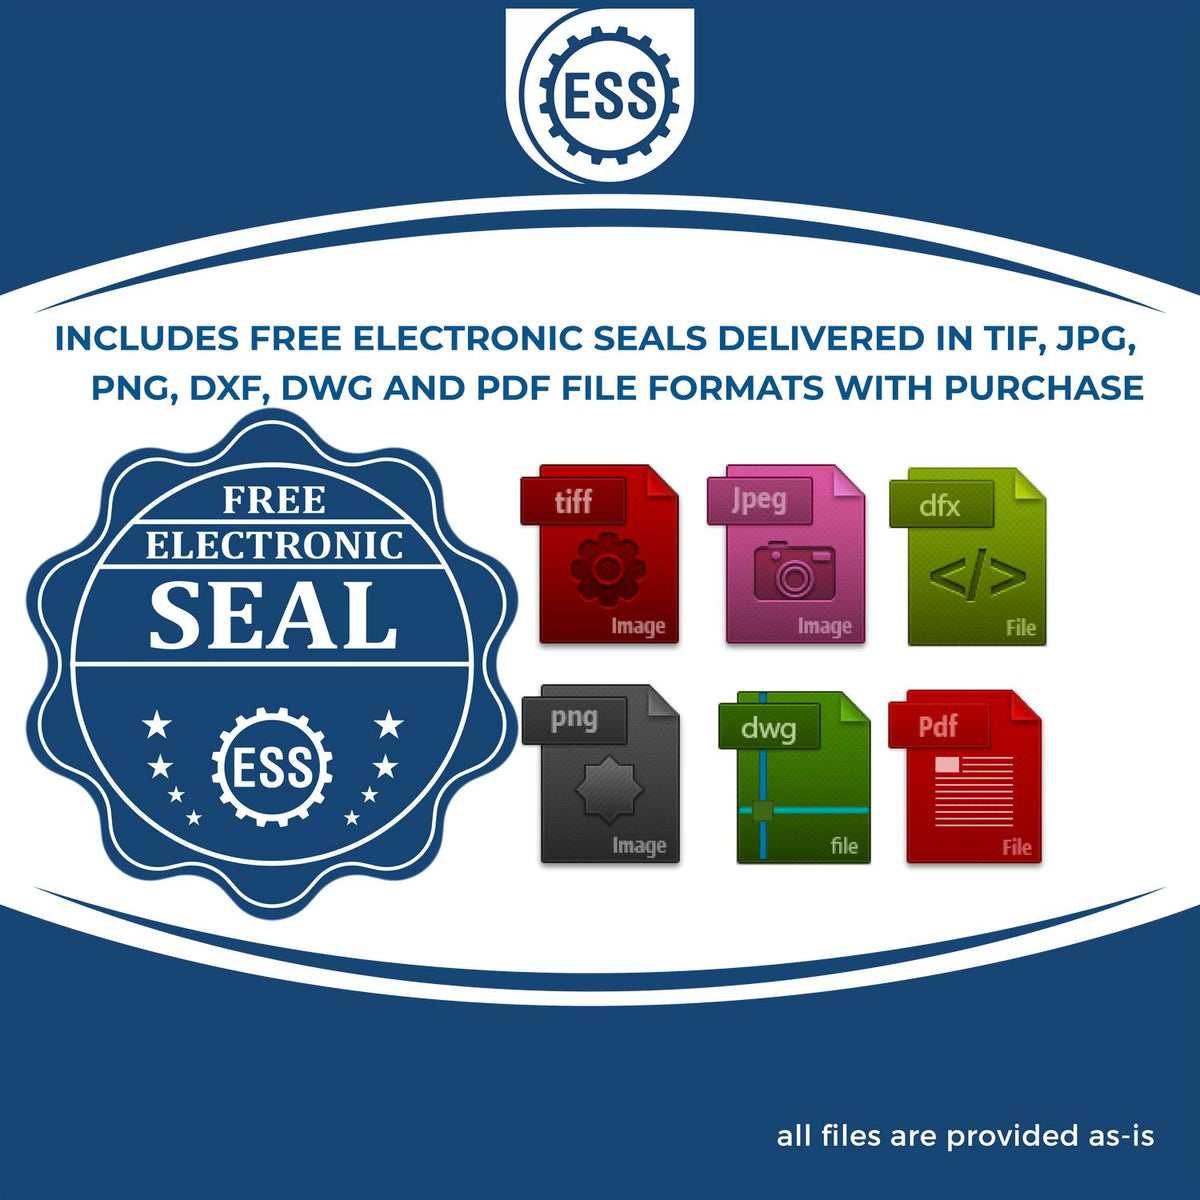 An infographic for the free electronic seal for the Gift Louisiana Geologist Seal illustrating the different file type icons such as DXF, DWG, TIF, JPG and PNG.